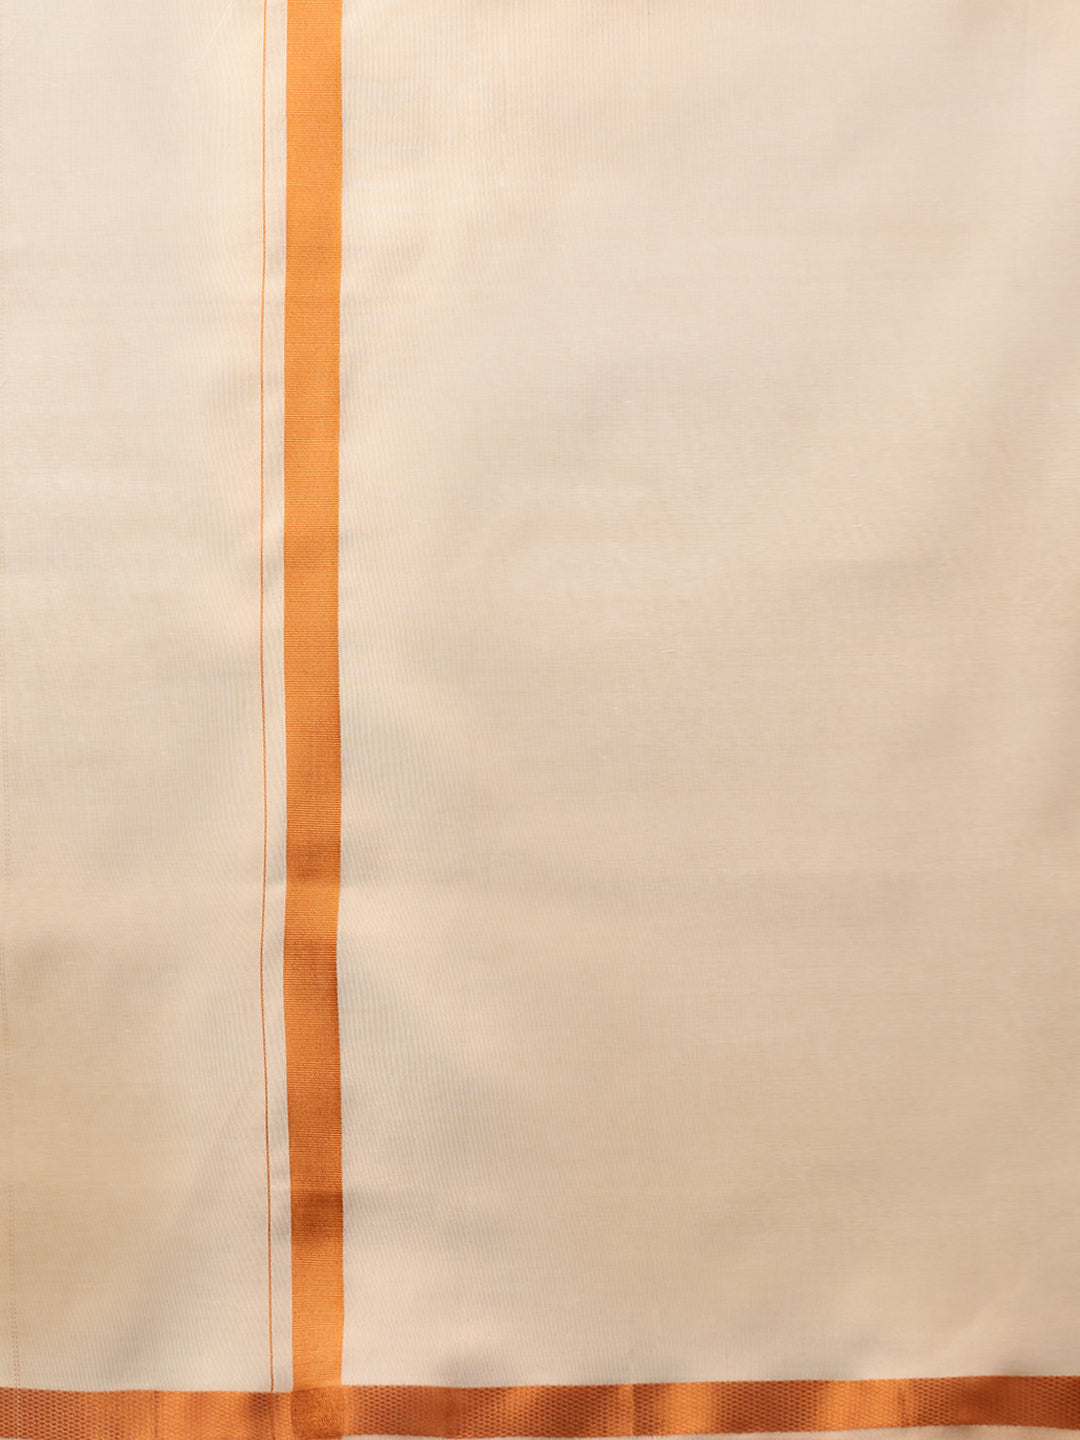 Mens Copper Tissue Full Sleeve Shirt with Matching Readymade Single Dhoti Combo